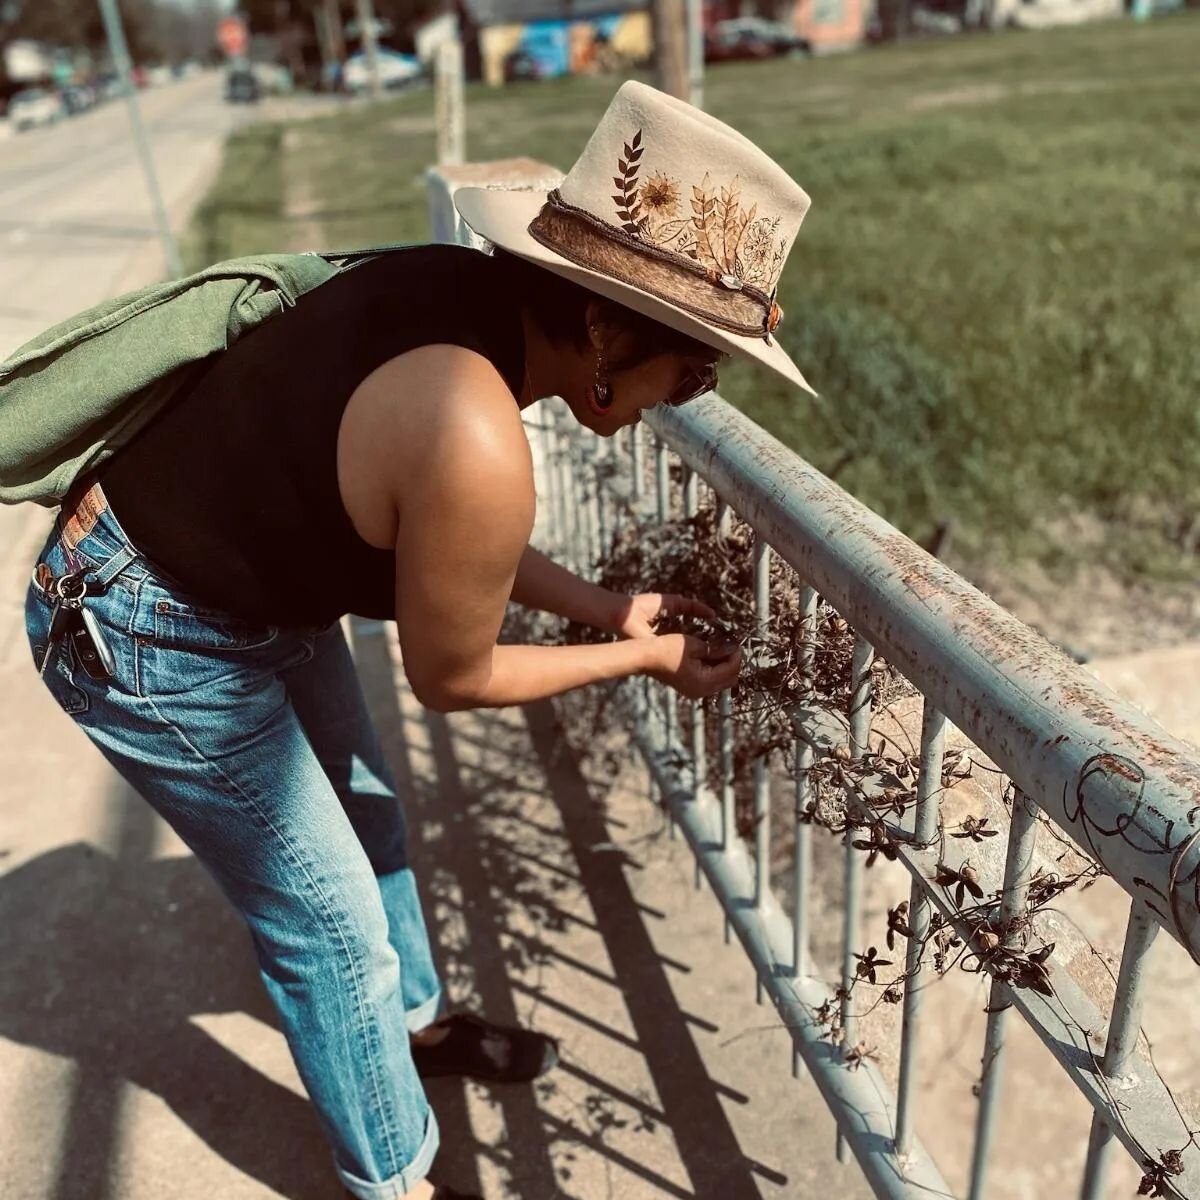 Foraging in my newly refurbished hat by the magnificent @remnanthats ! Gracias @jomau.art!!! 

Grandpa's hats have an all new life and I'm beyond thrilled with the results.

📸: @mconner512